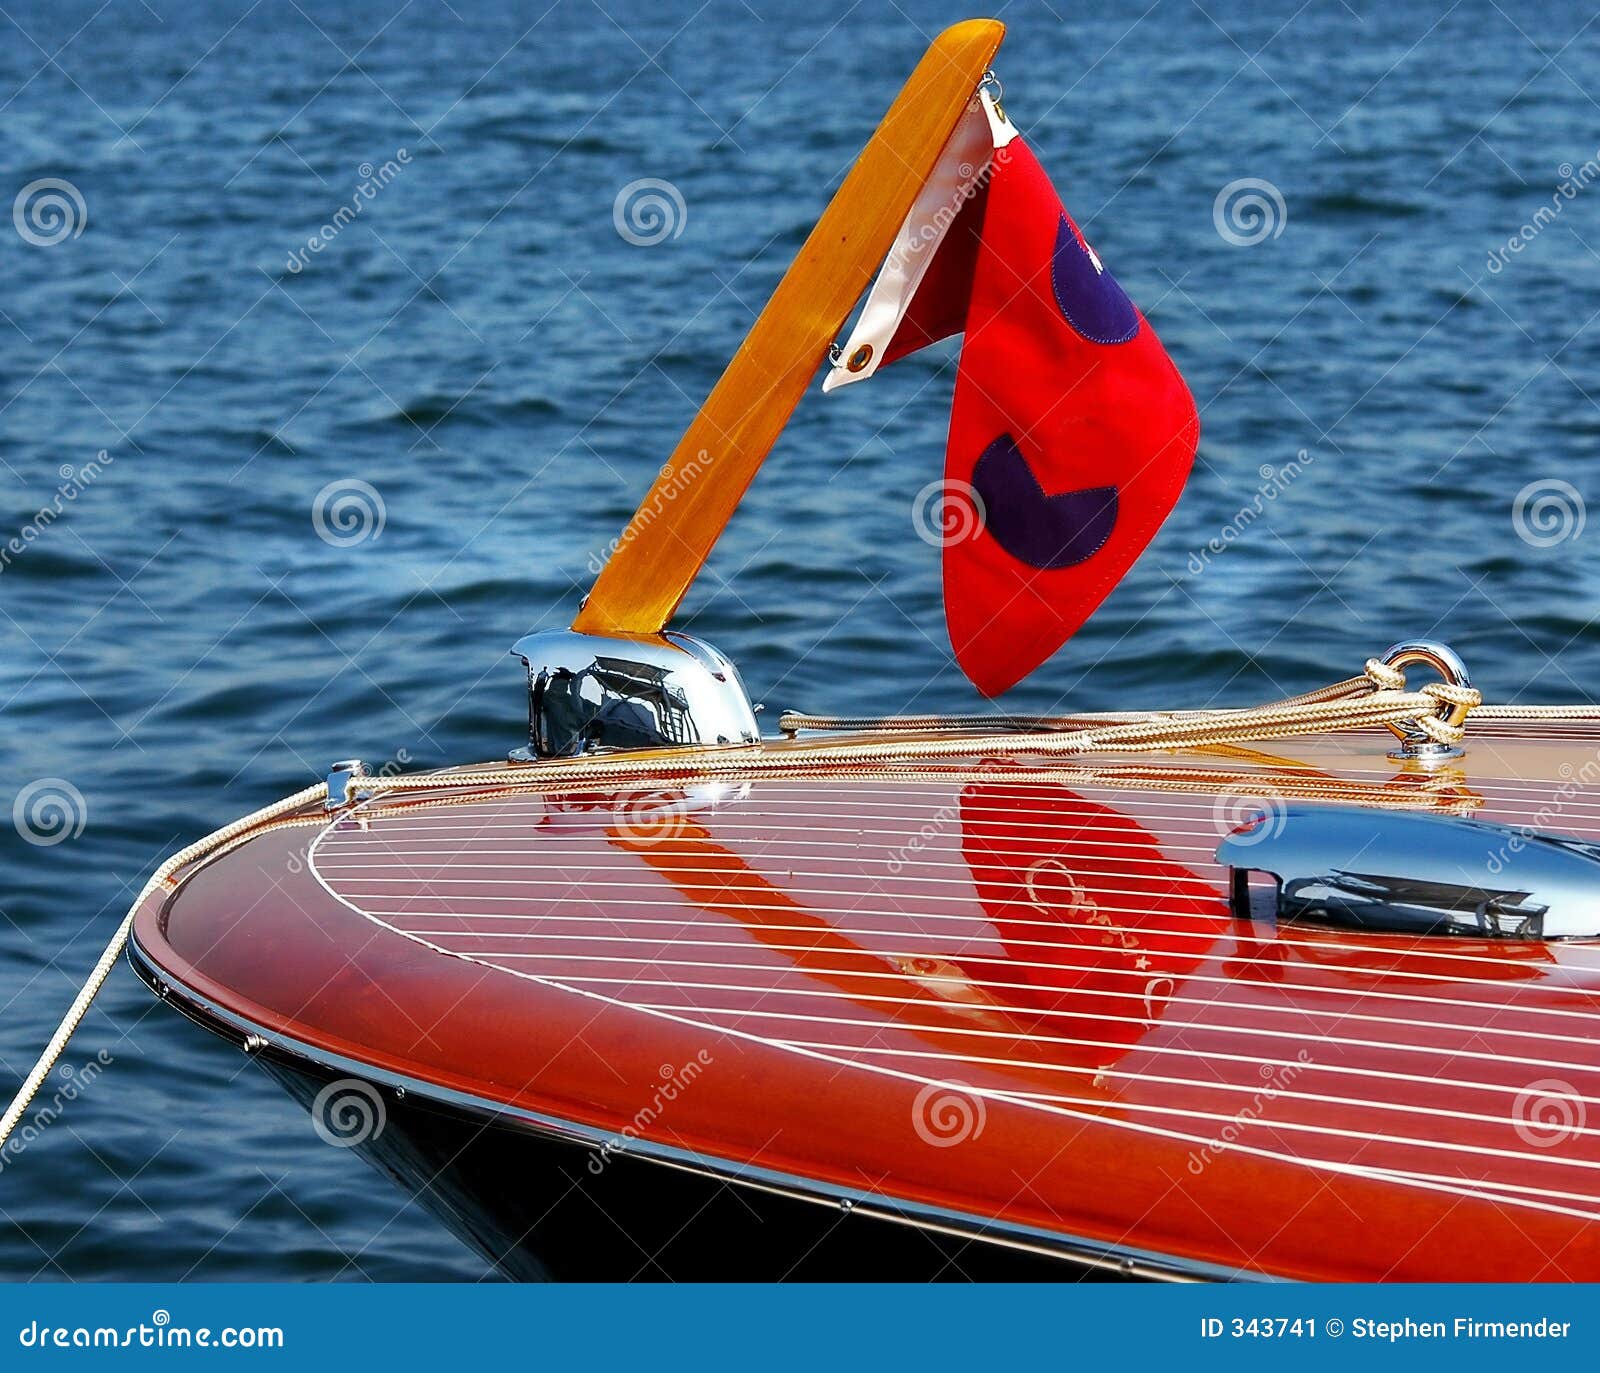 Classic Wooden Speed Boat 3 Stock Image - Image of lake 